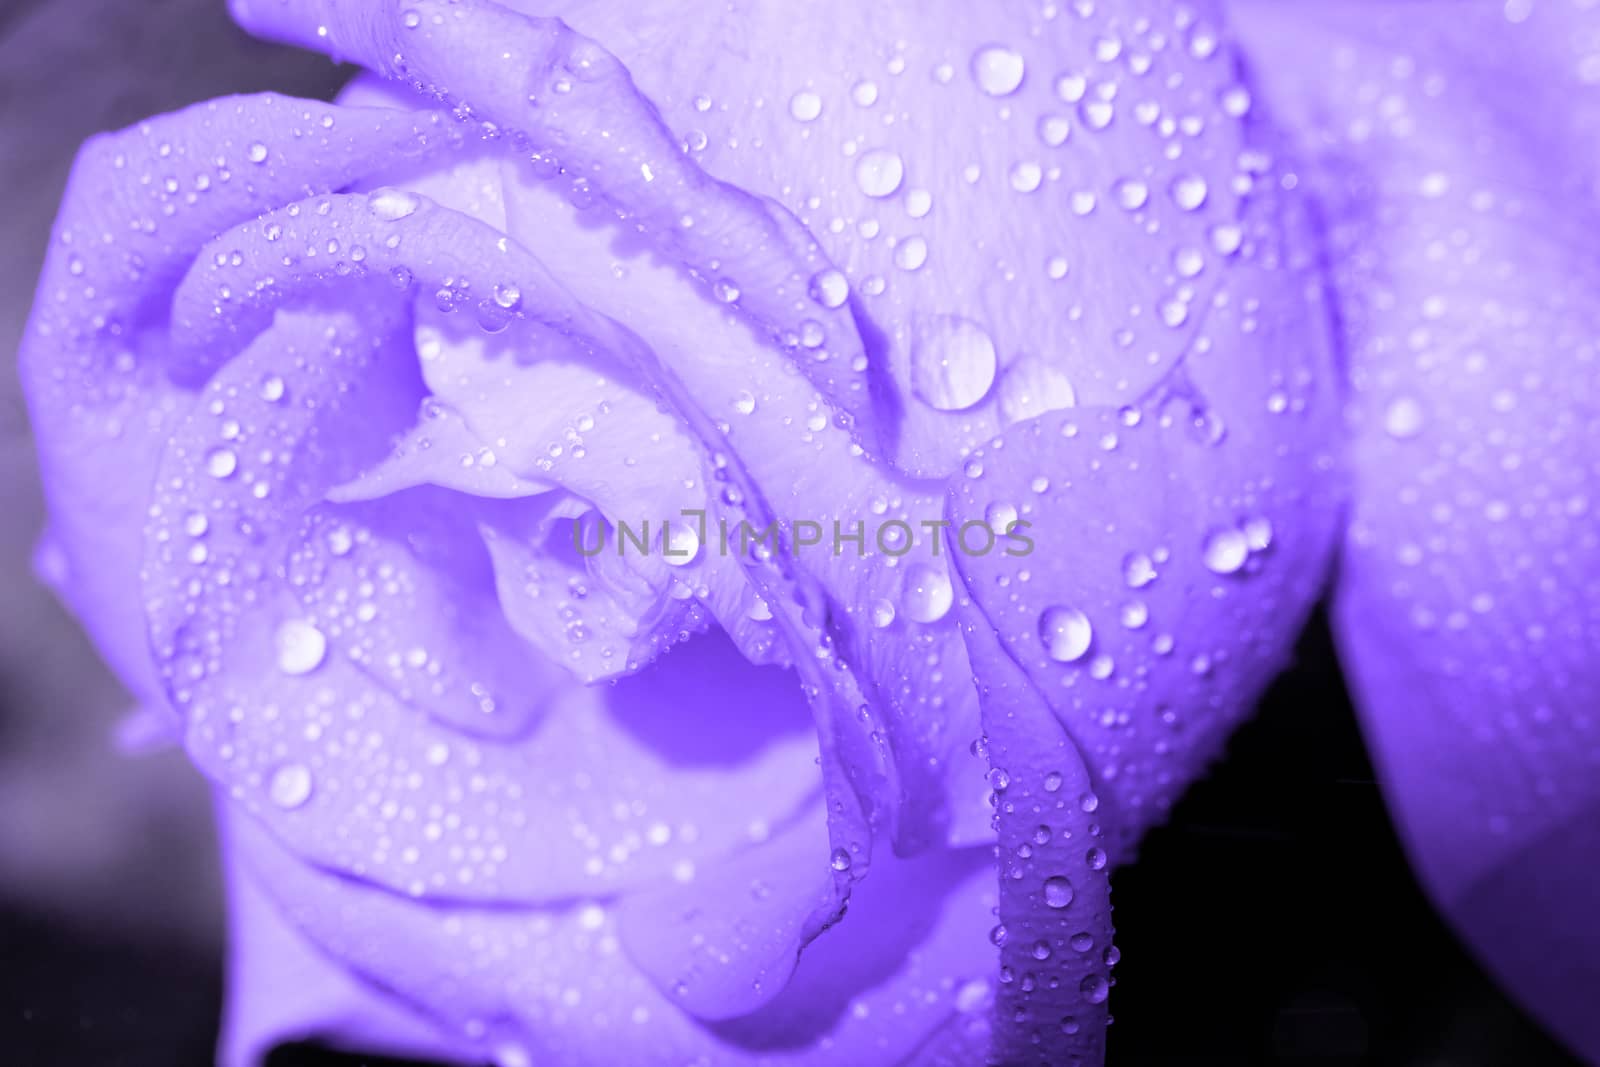 Macro photo of a rose with water droplets